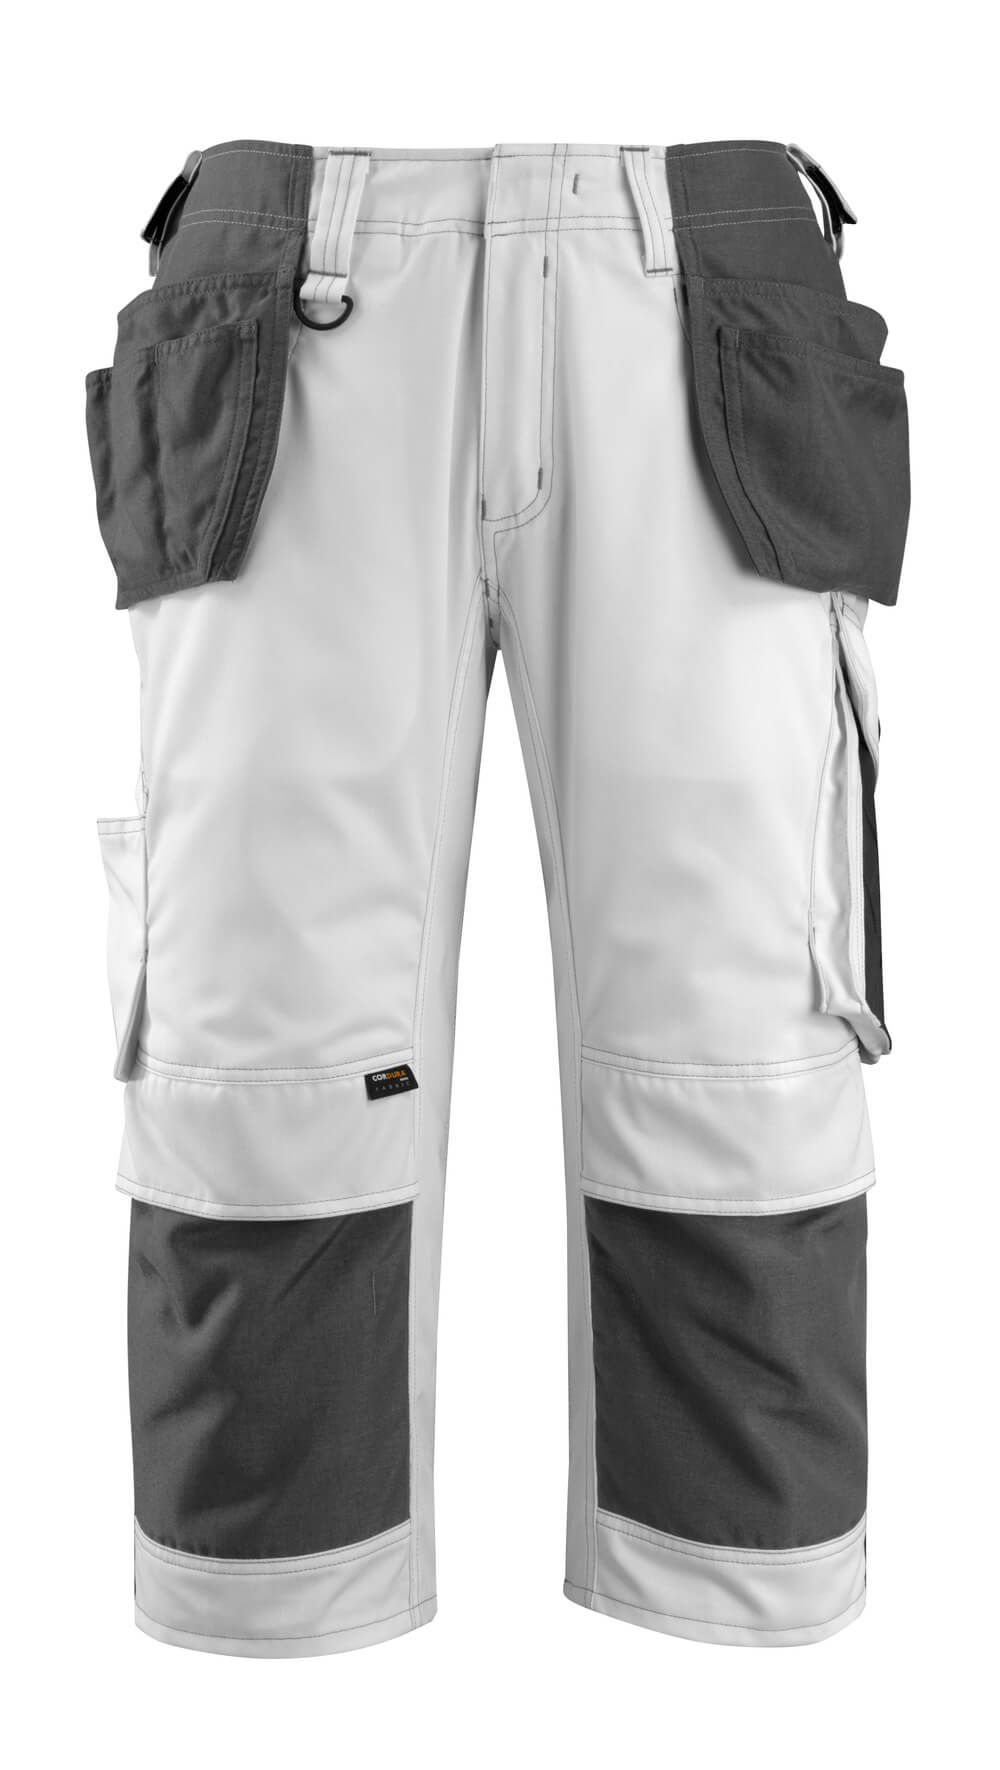 MASCOT UNIQUE � Length Trousers with kneepad pockets and holster pockets 14349